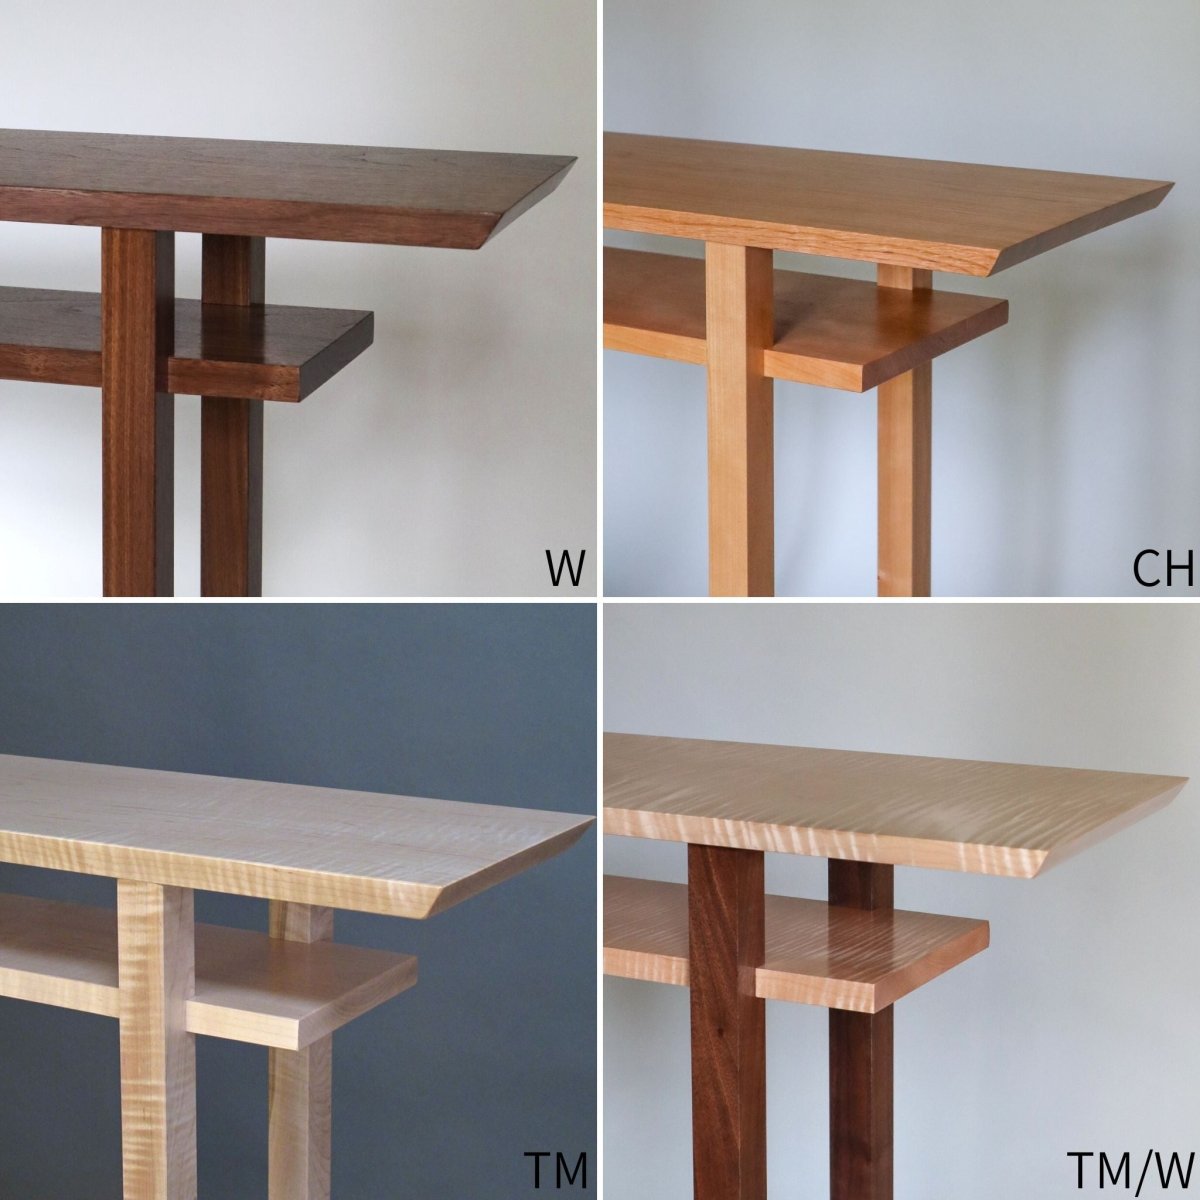 Our tall narrow entry tables can be handmade from this selection of premium wood choices at Mokuzai Furniture.